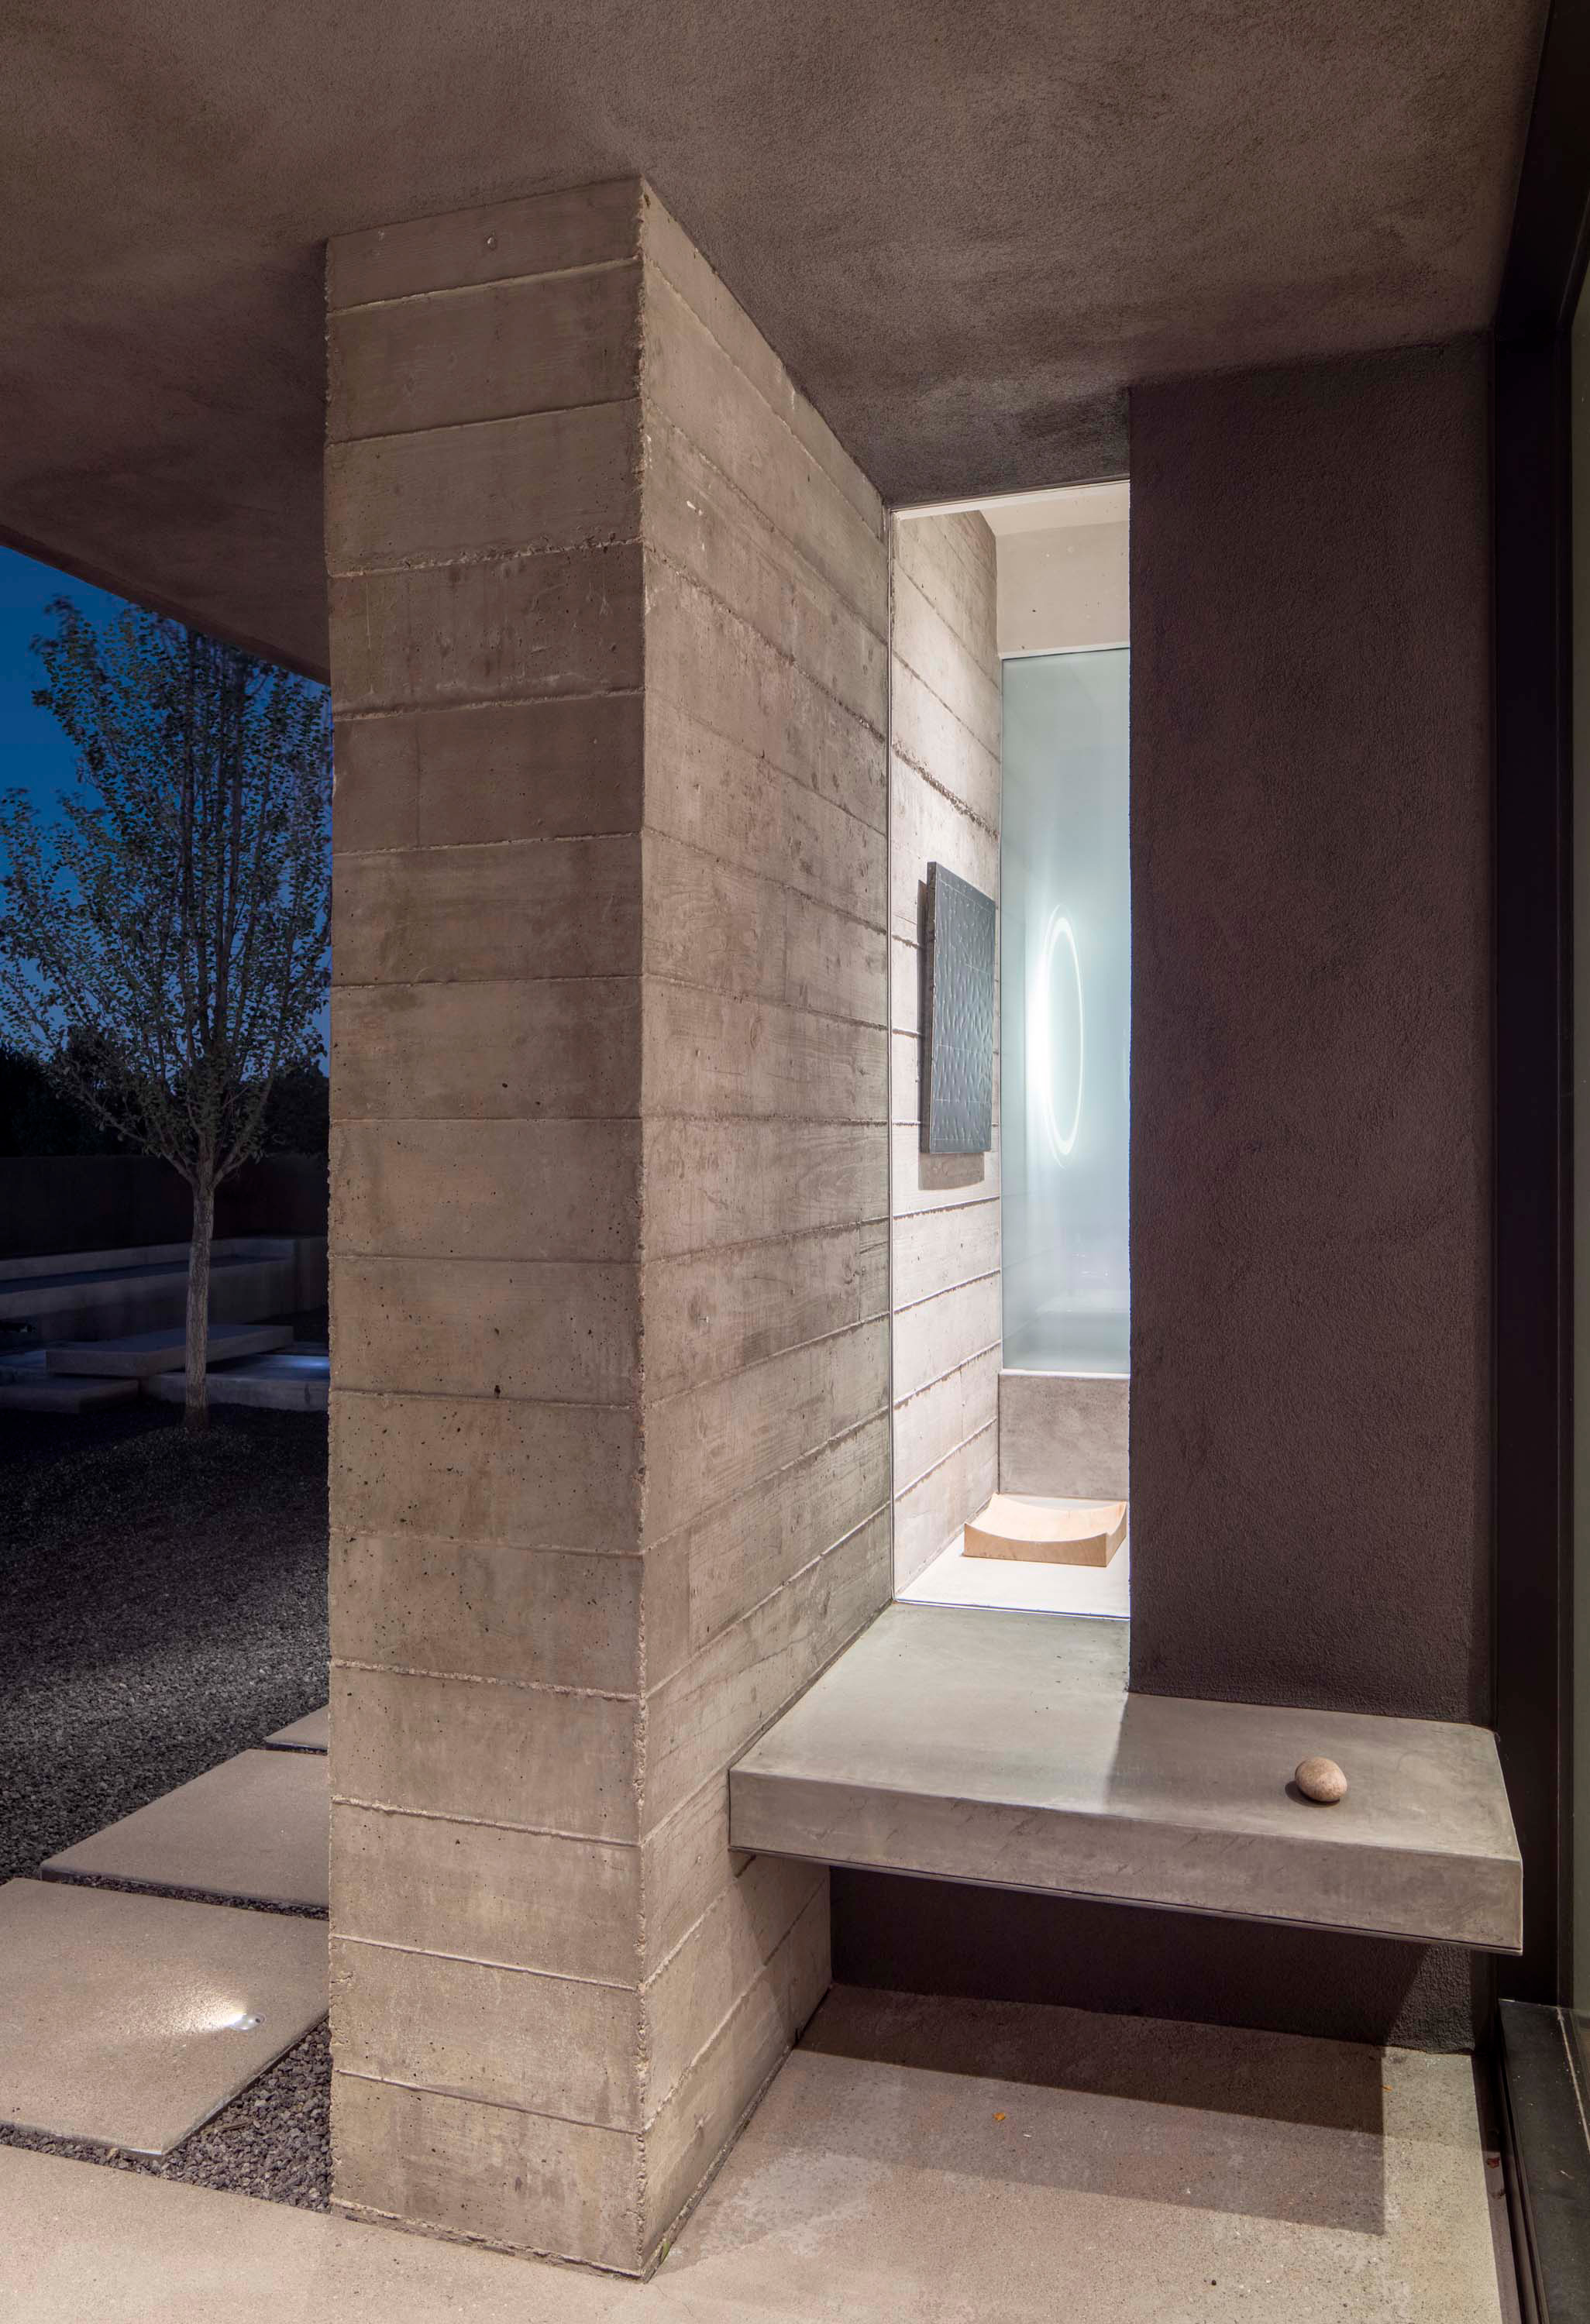 Exterior photo of the Sangre de Cristo House by Specht Novak Architects. Shot by Casey Dunn, featuring geometric concrete accents of the perimeter of the home.